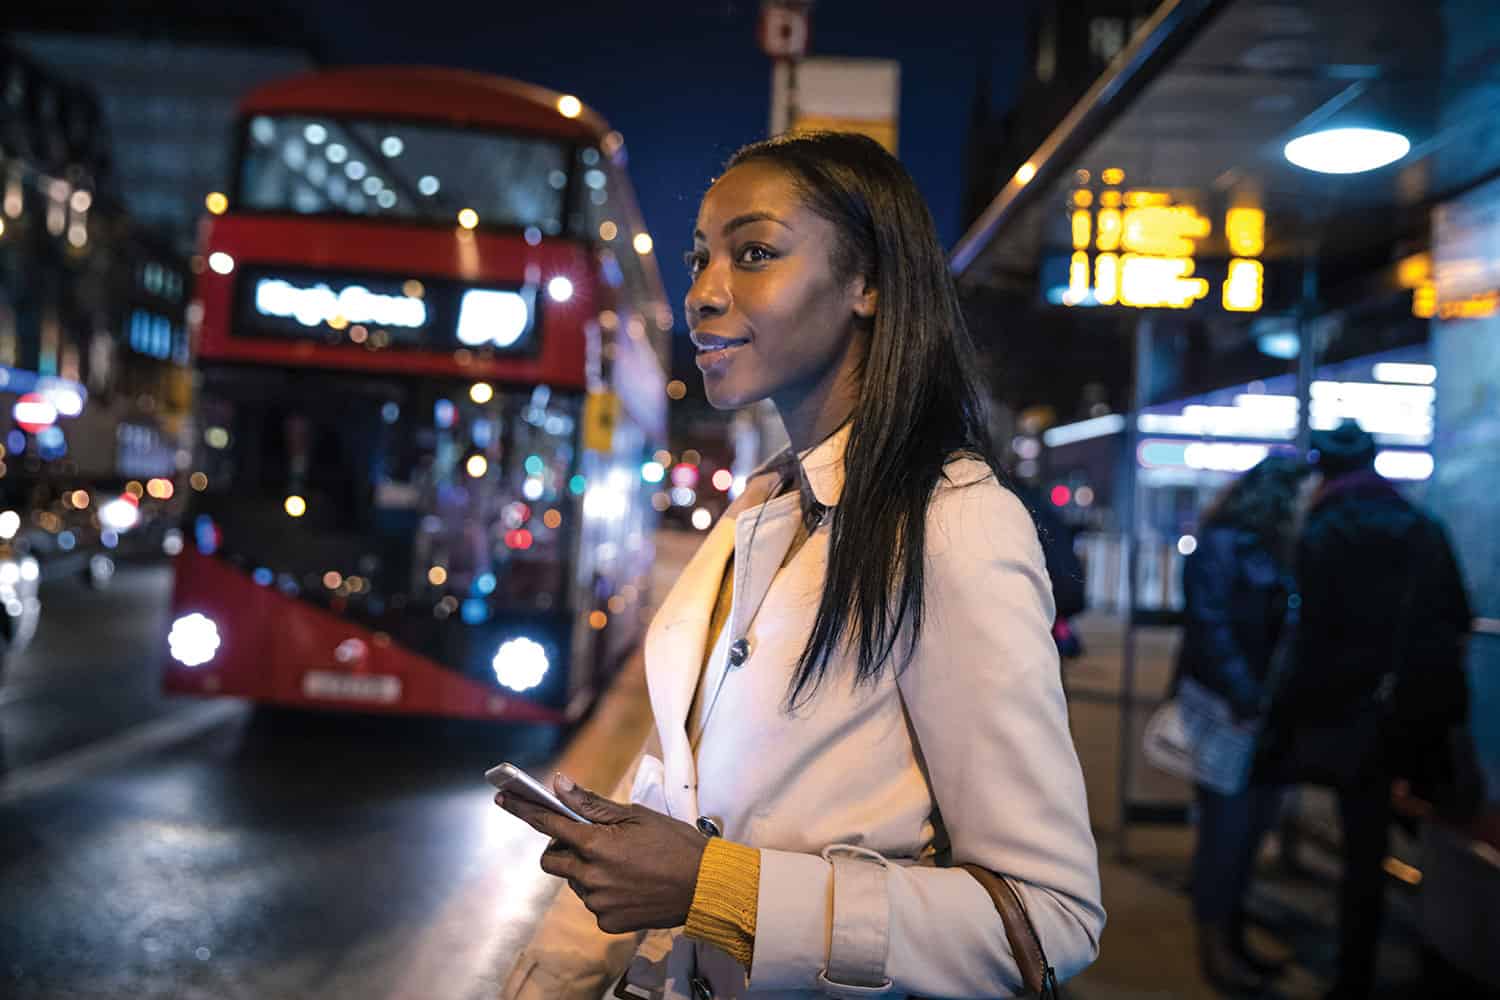 A young Black woman waiting for her bus home at night.